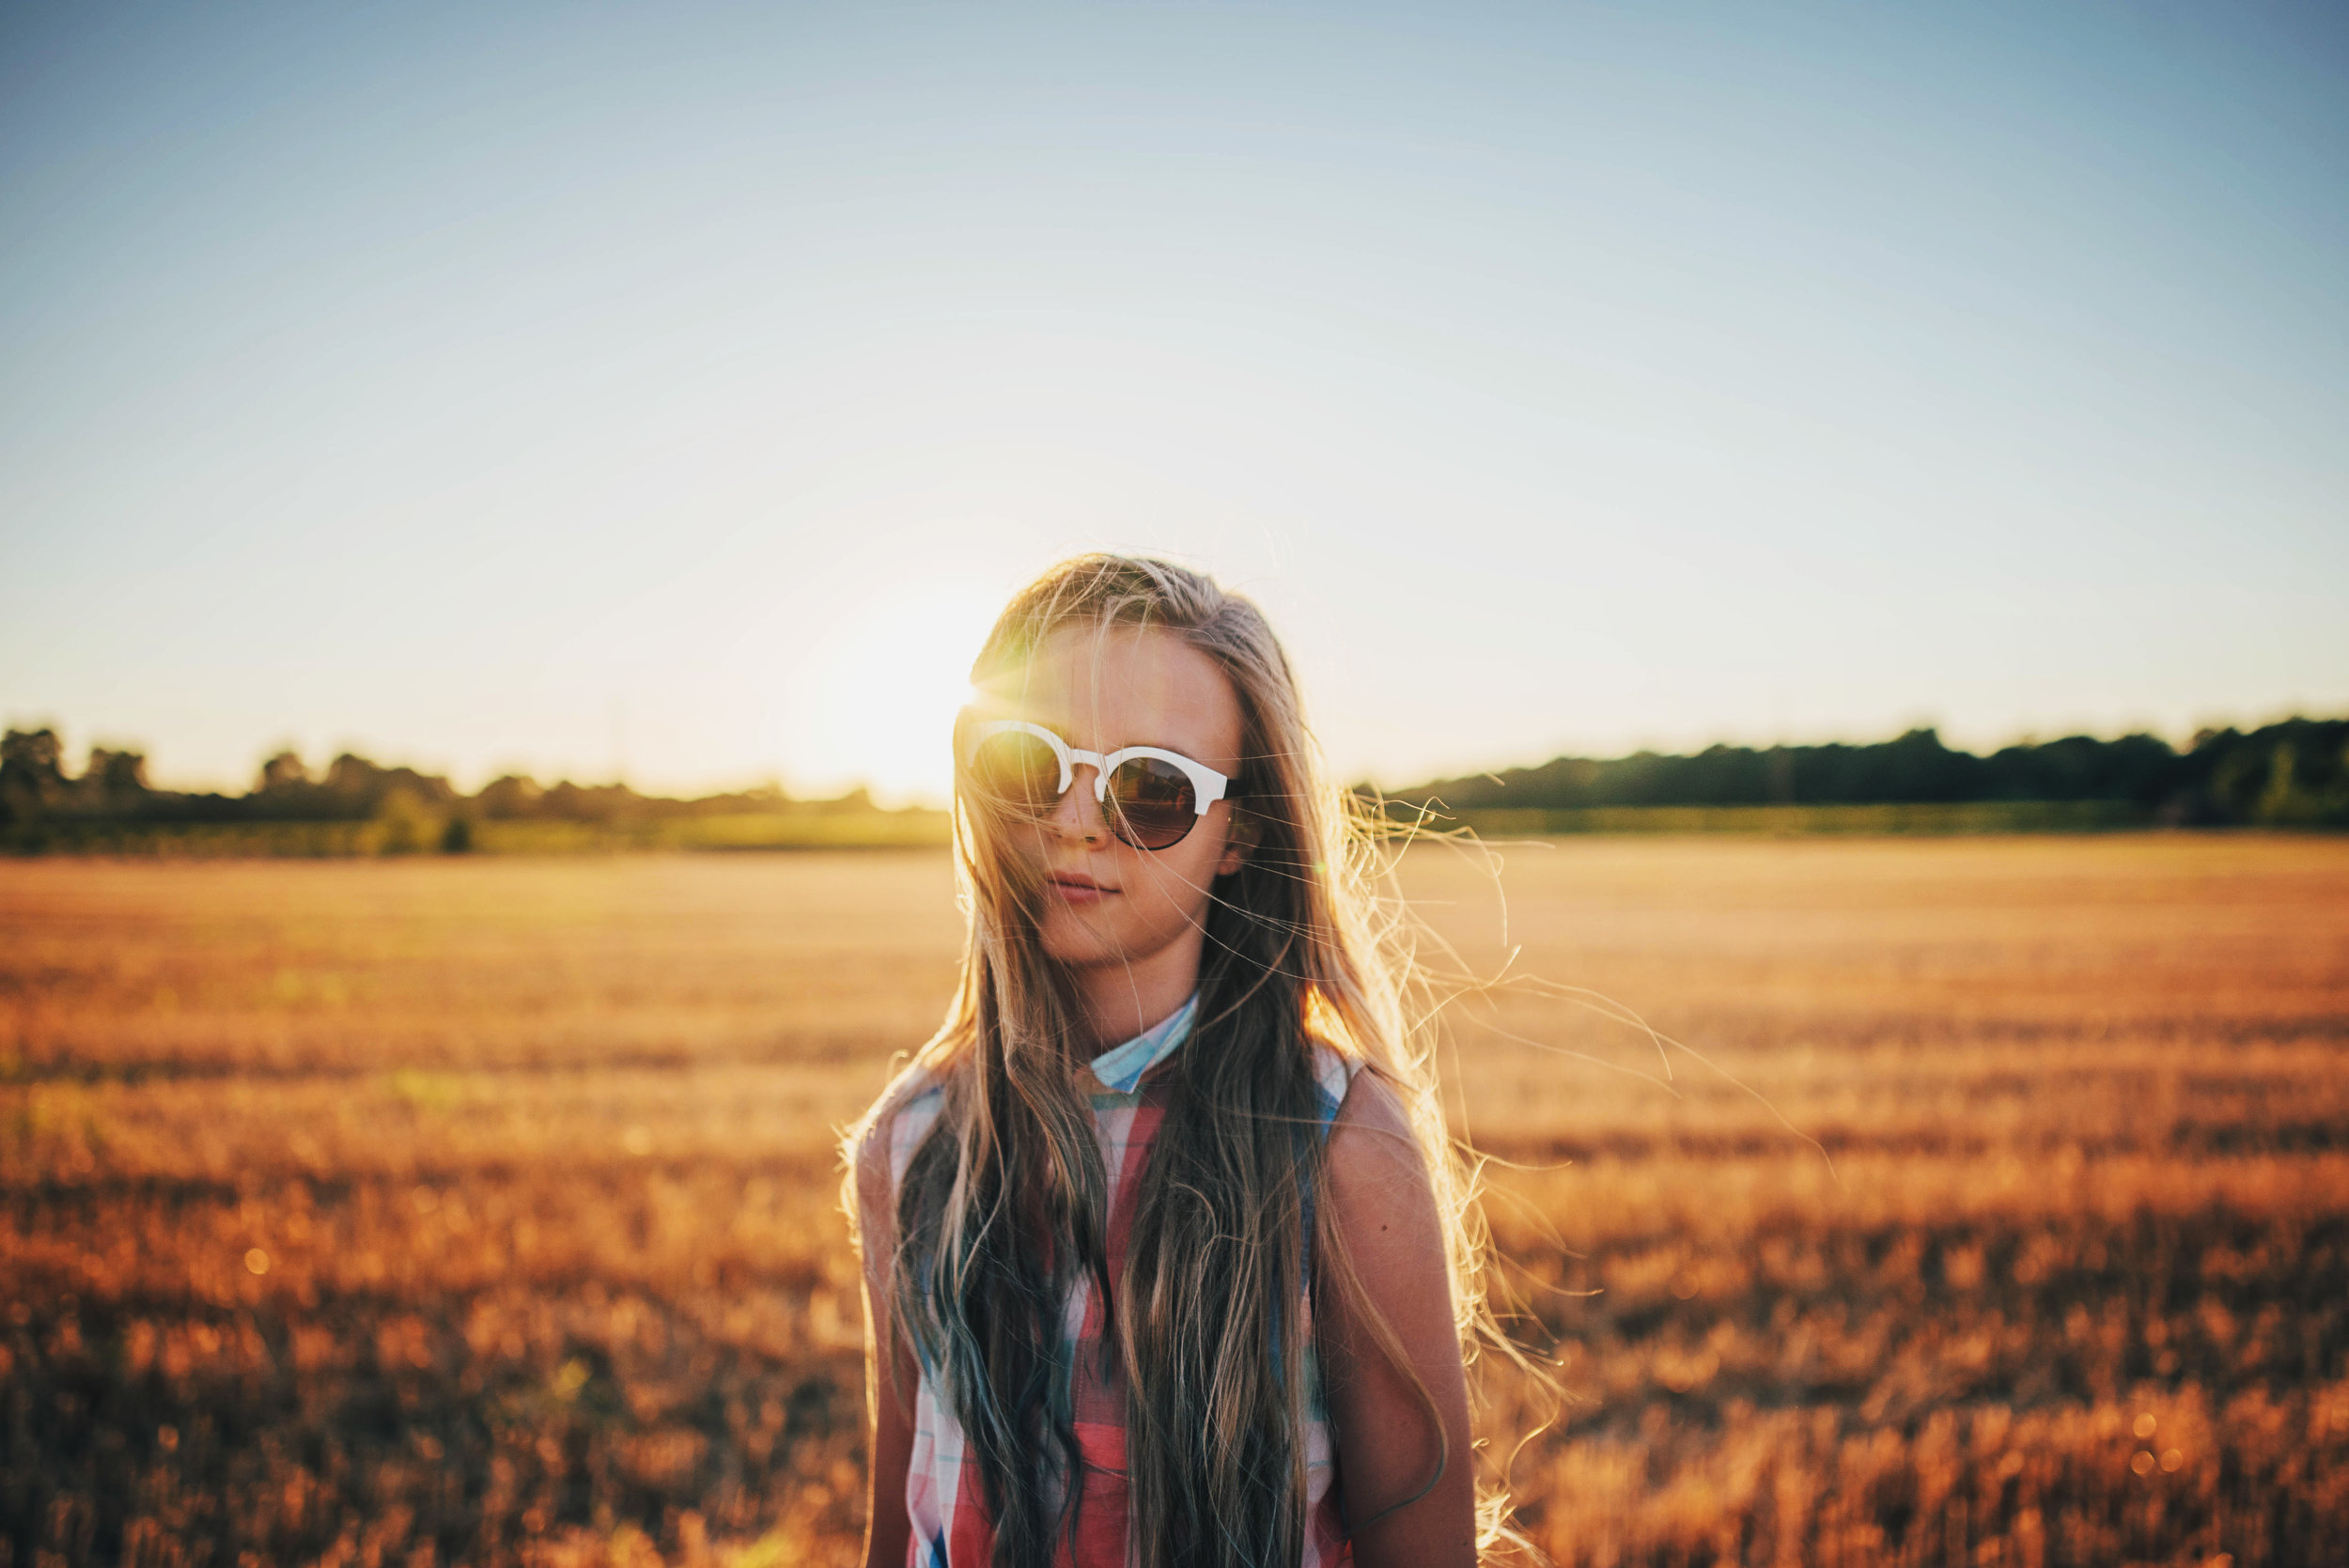 Young girl in Sunglasses stands in field at sunset Essex UK Documentary Portrait Photographer